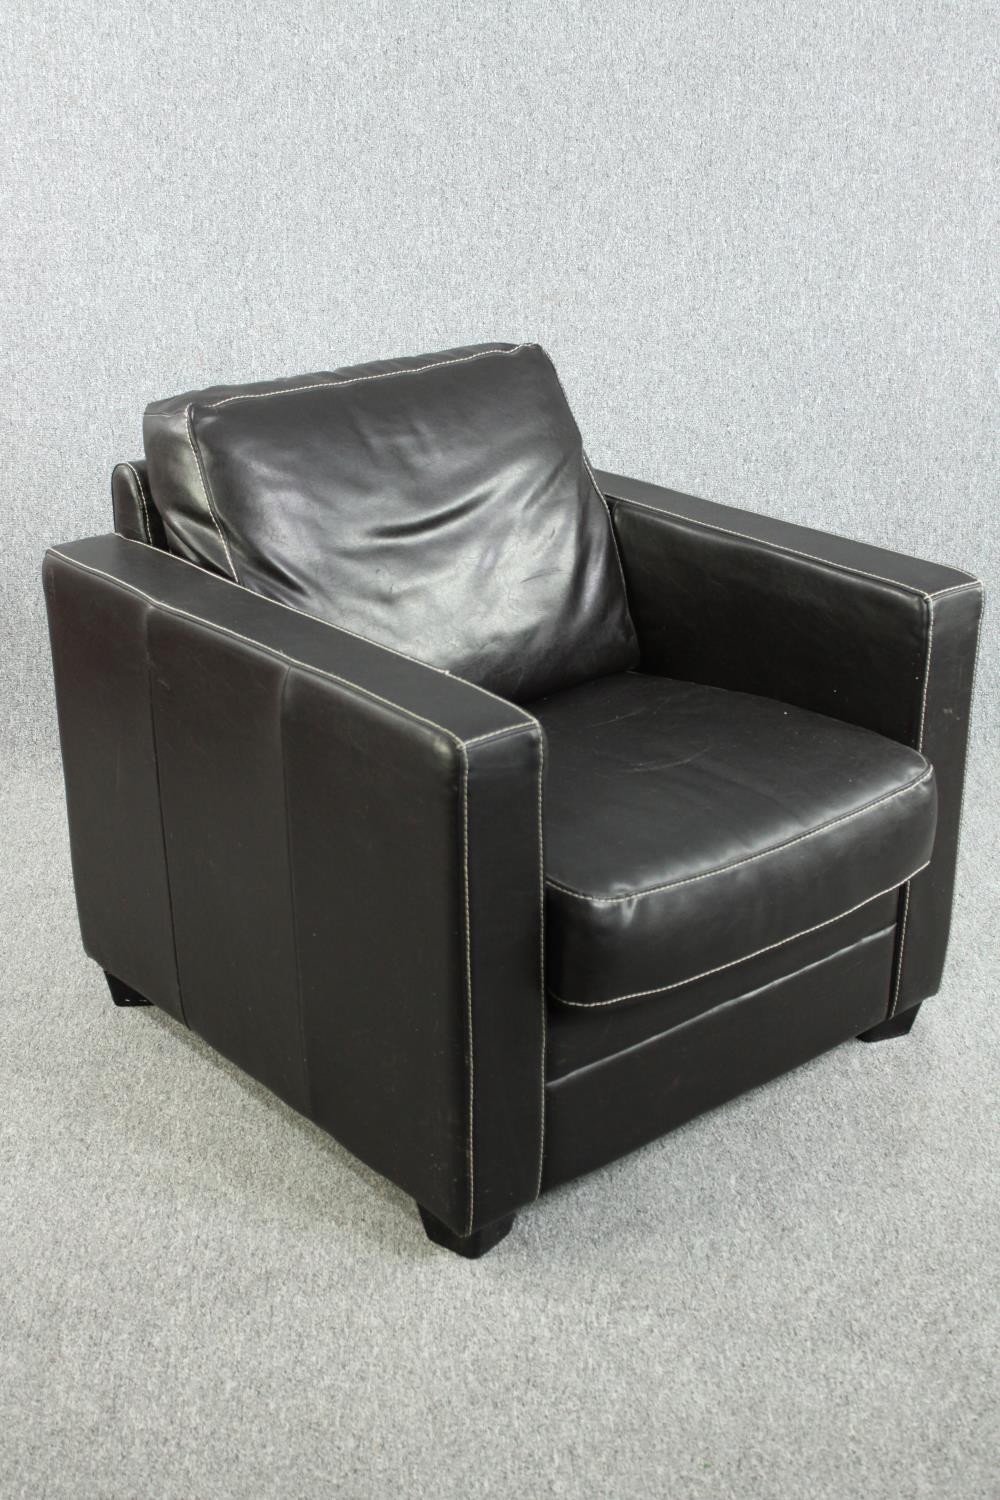 Armchair, contemporary leather upholstered. H.83 W.84 D.87cm. - Image 2 of 5